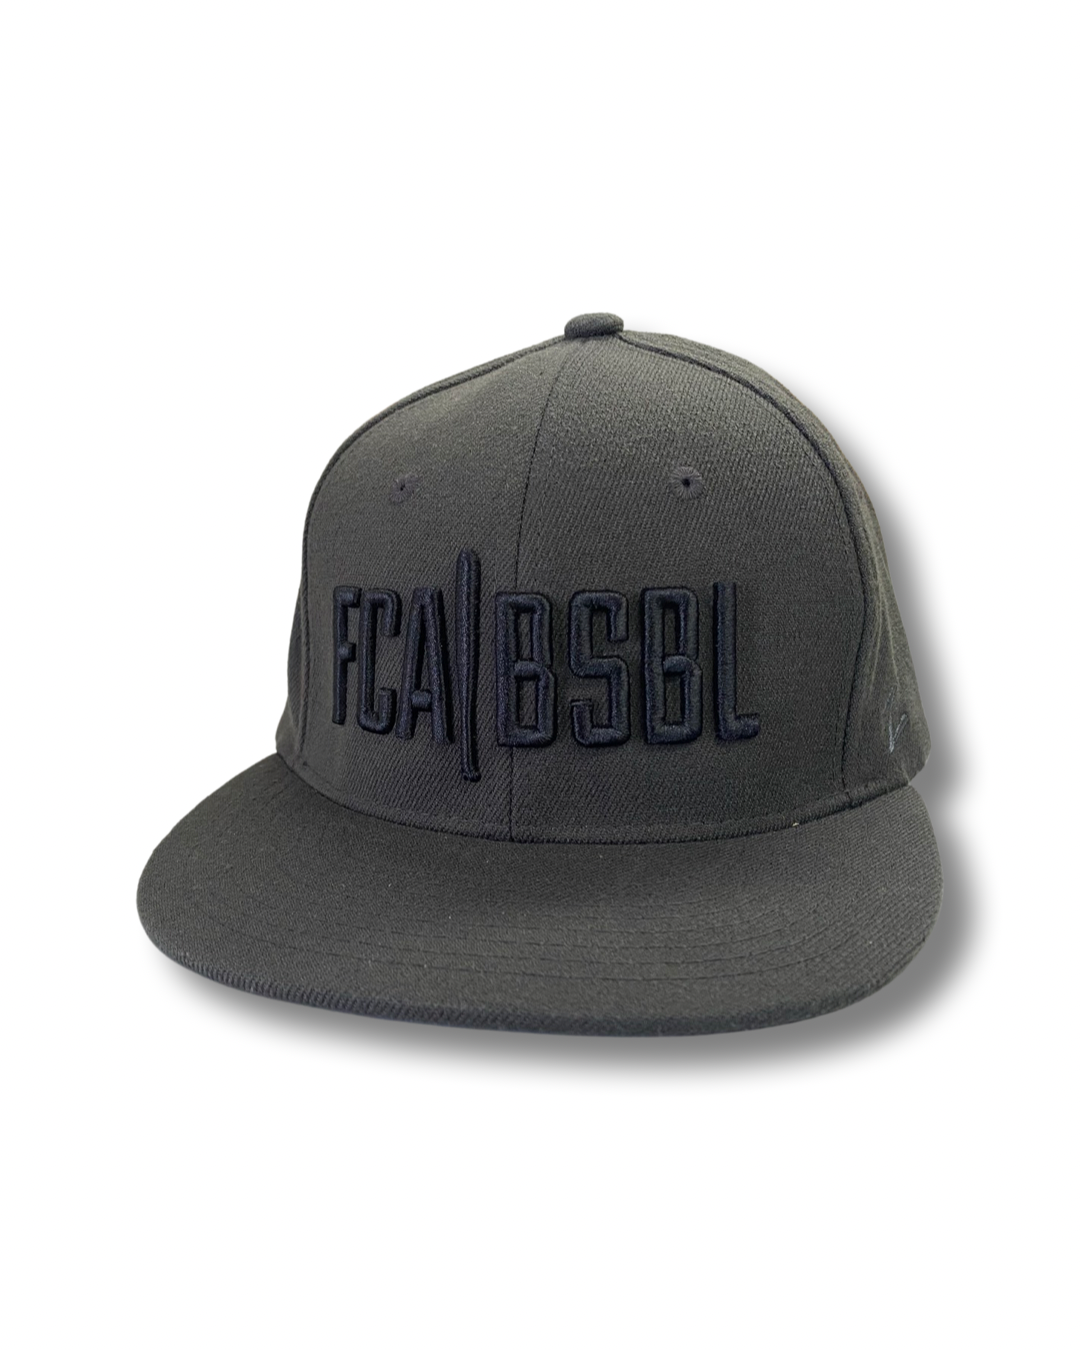 FCA BSBL Fitted Hat